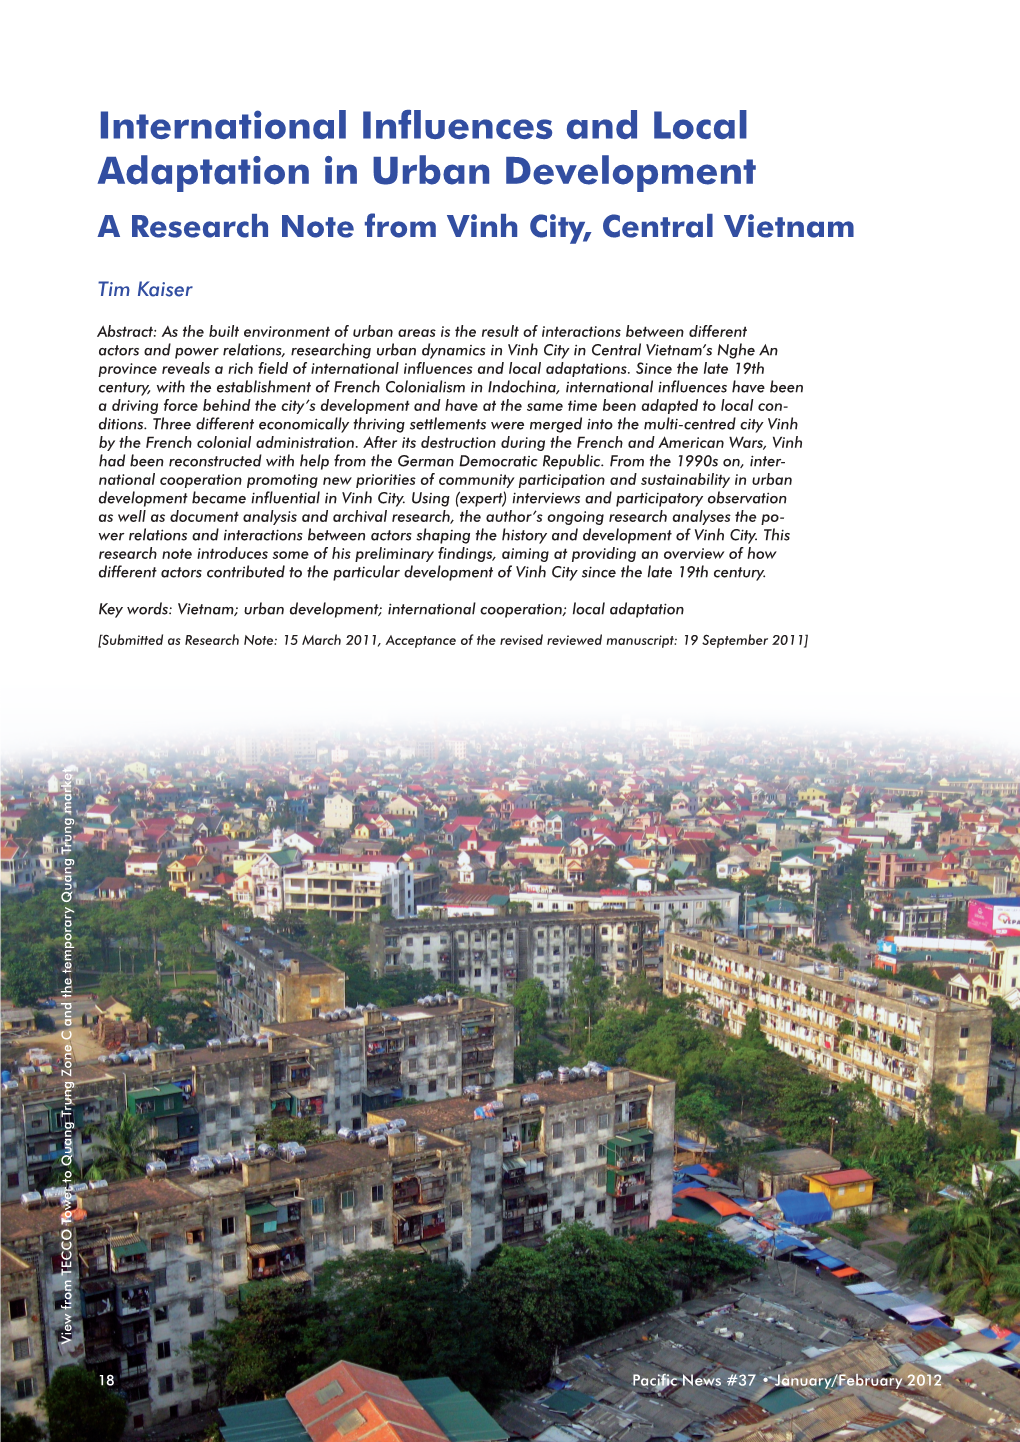 International Influences and Local Adaptation in Urban Development a Research Note from Vinh City, Central Vietnam